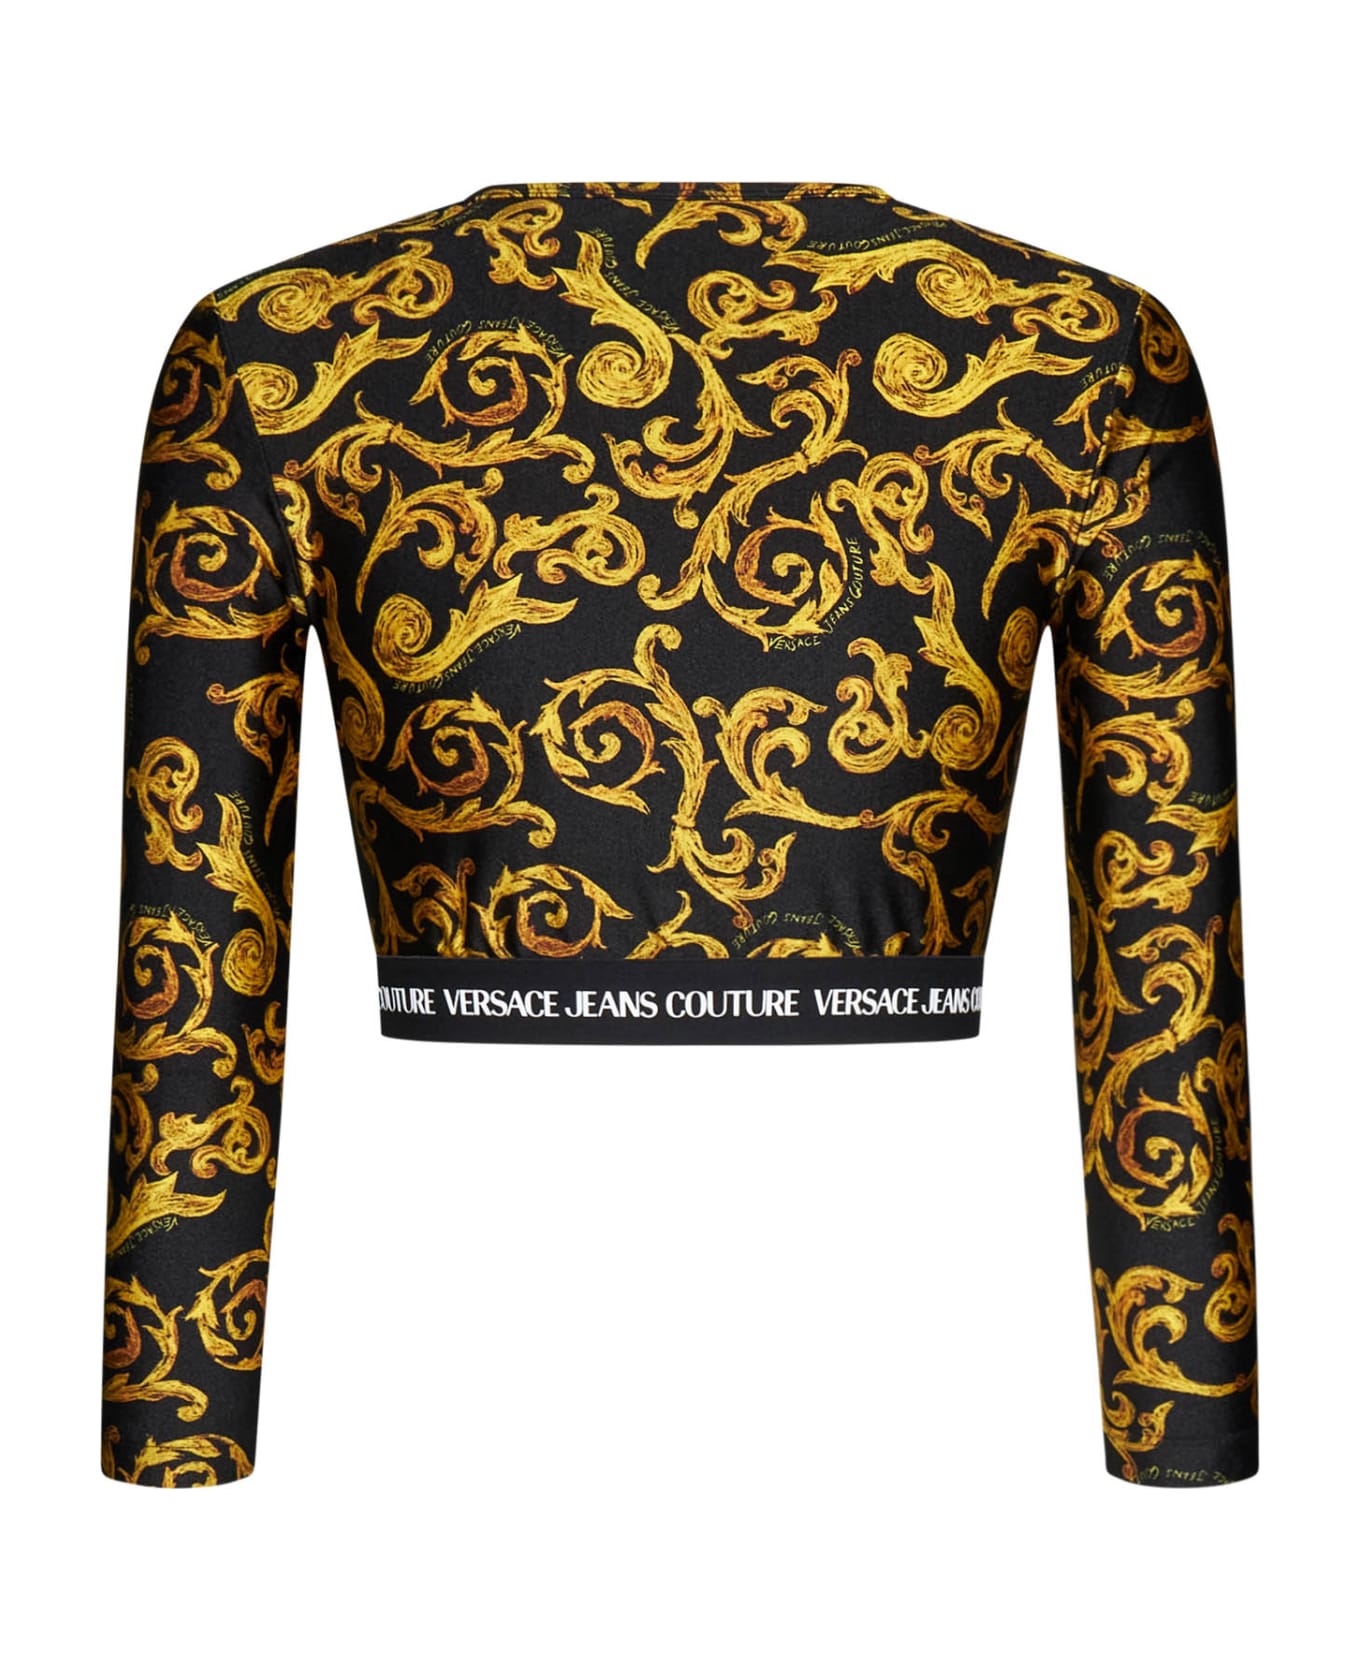 Versace Jeans Couture T-shirt - Black/gold